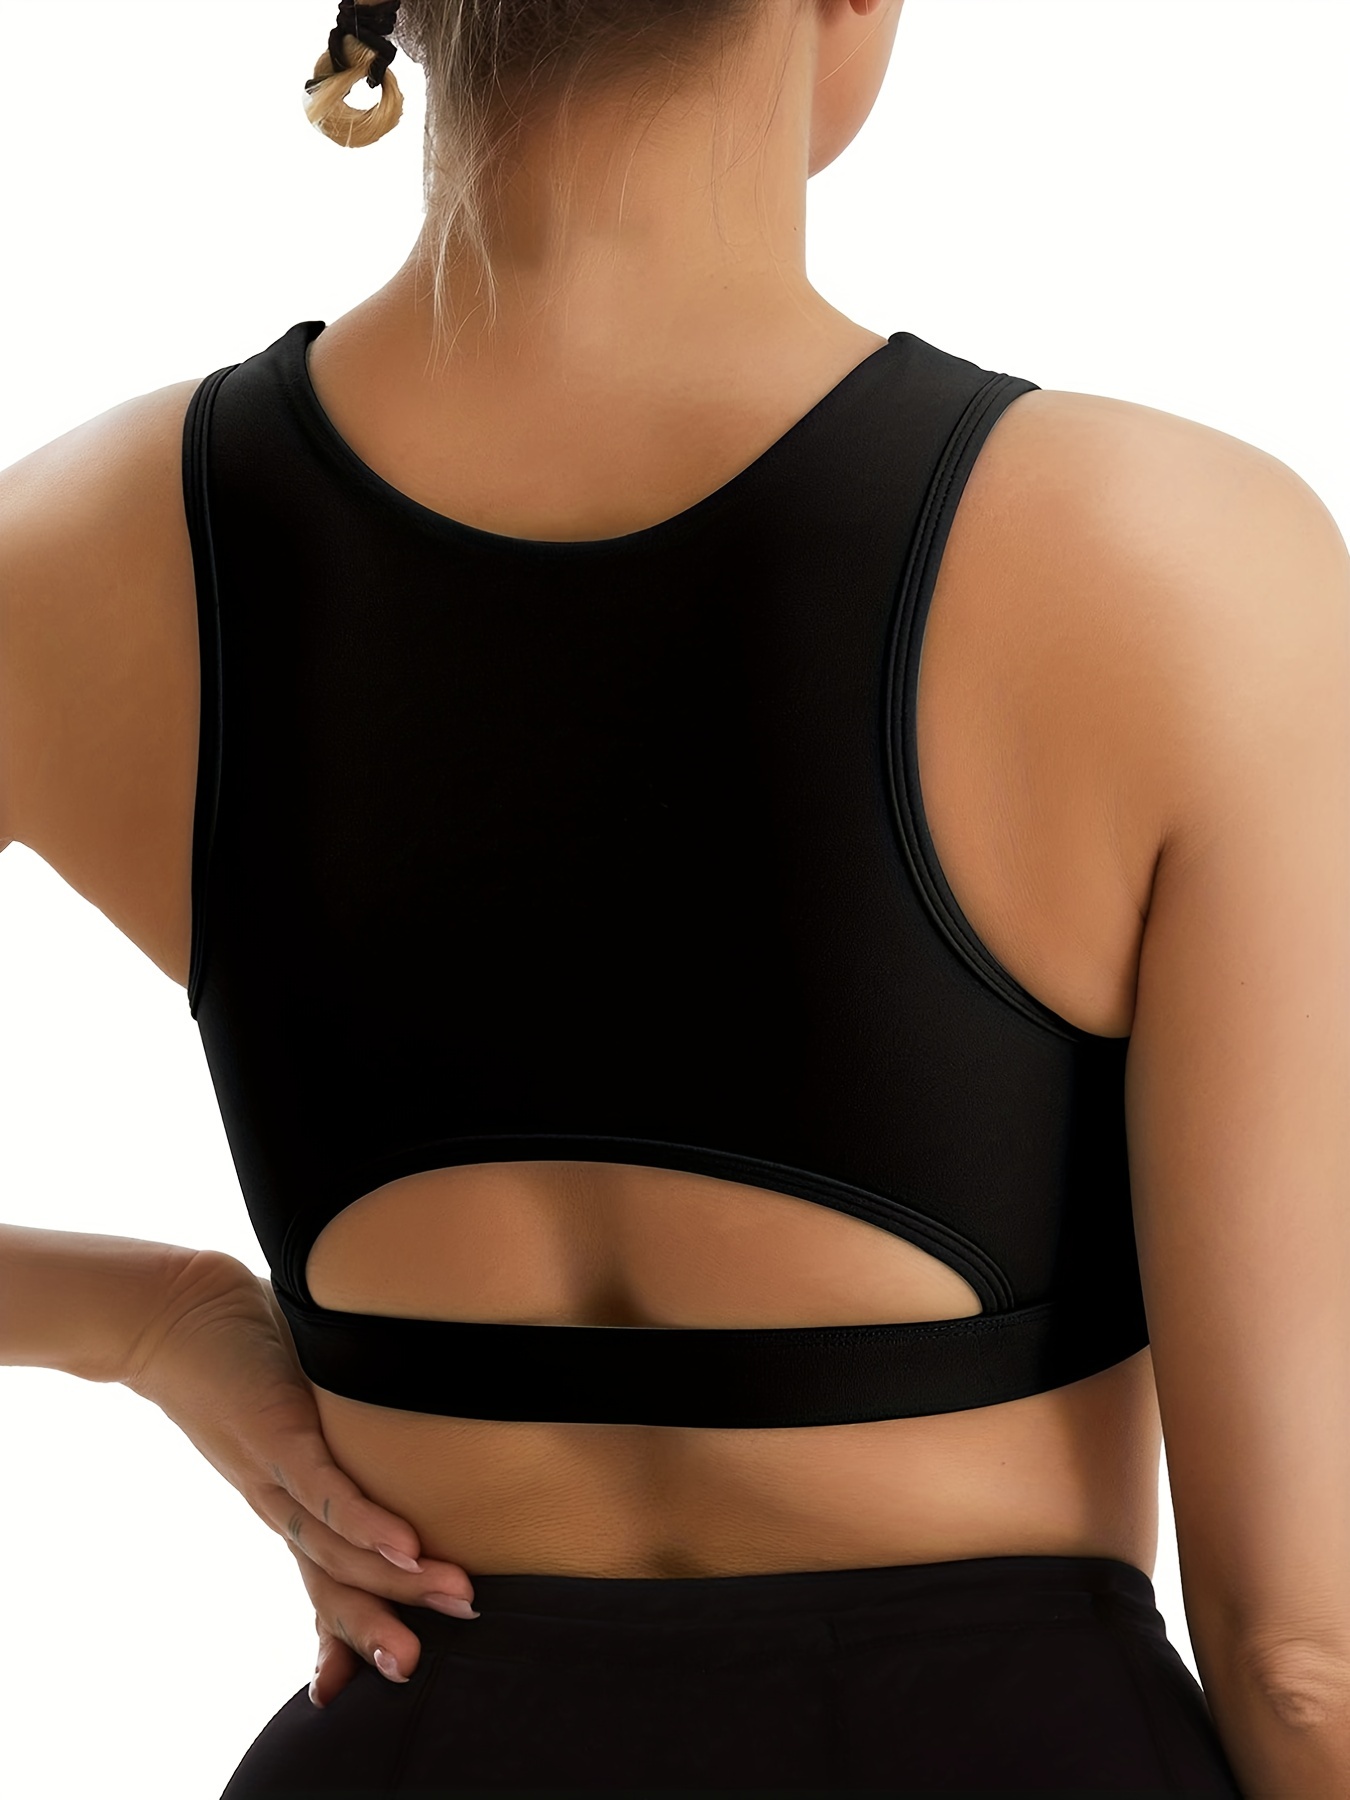 Women Padded Push Up Sports Bra High Impact Support For Yoga Gym Running  Croptop